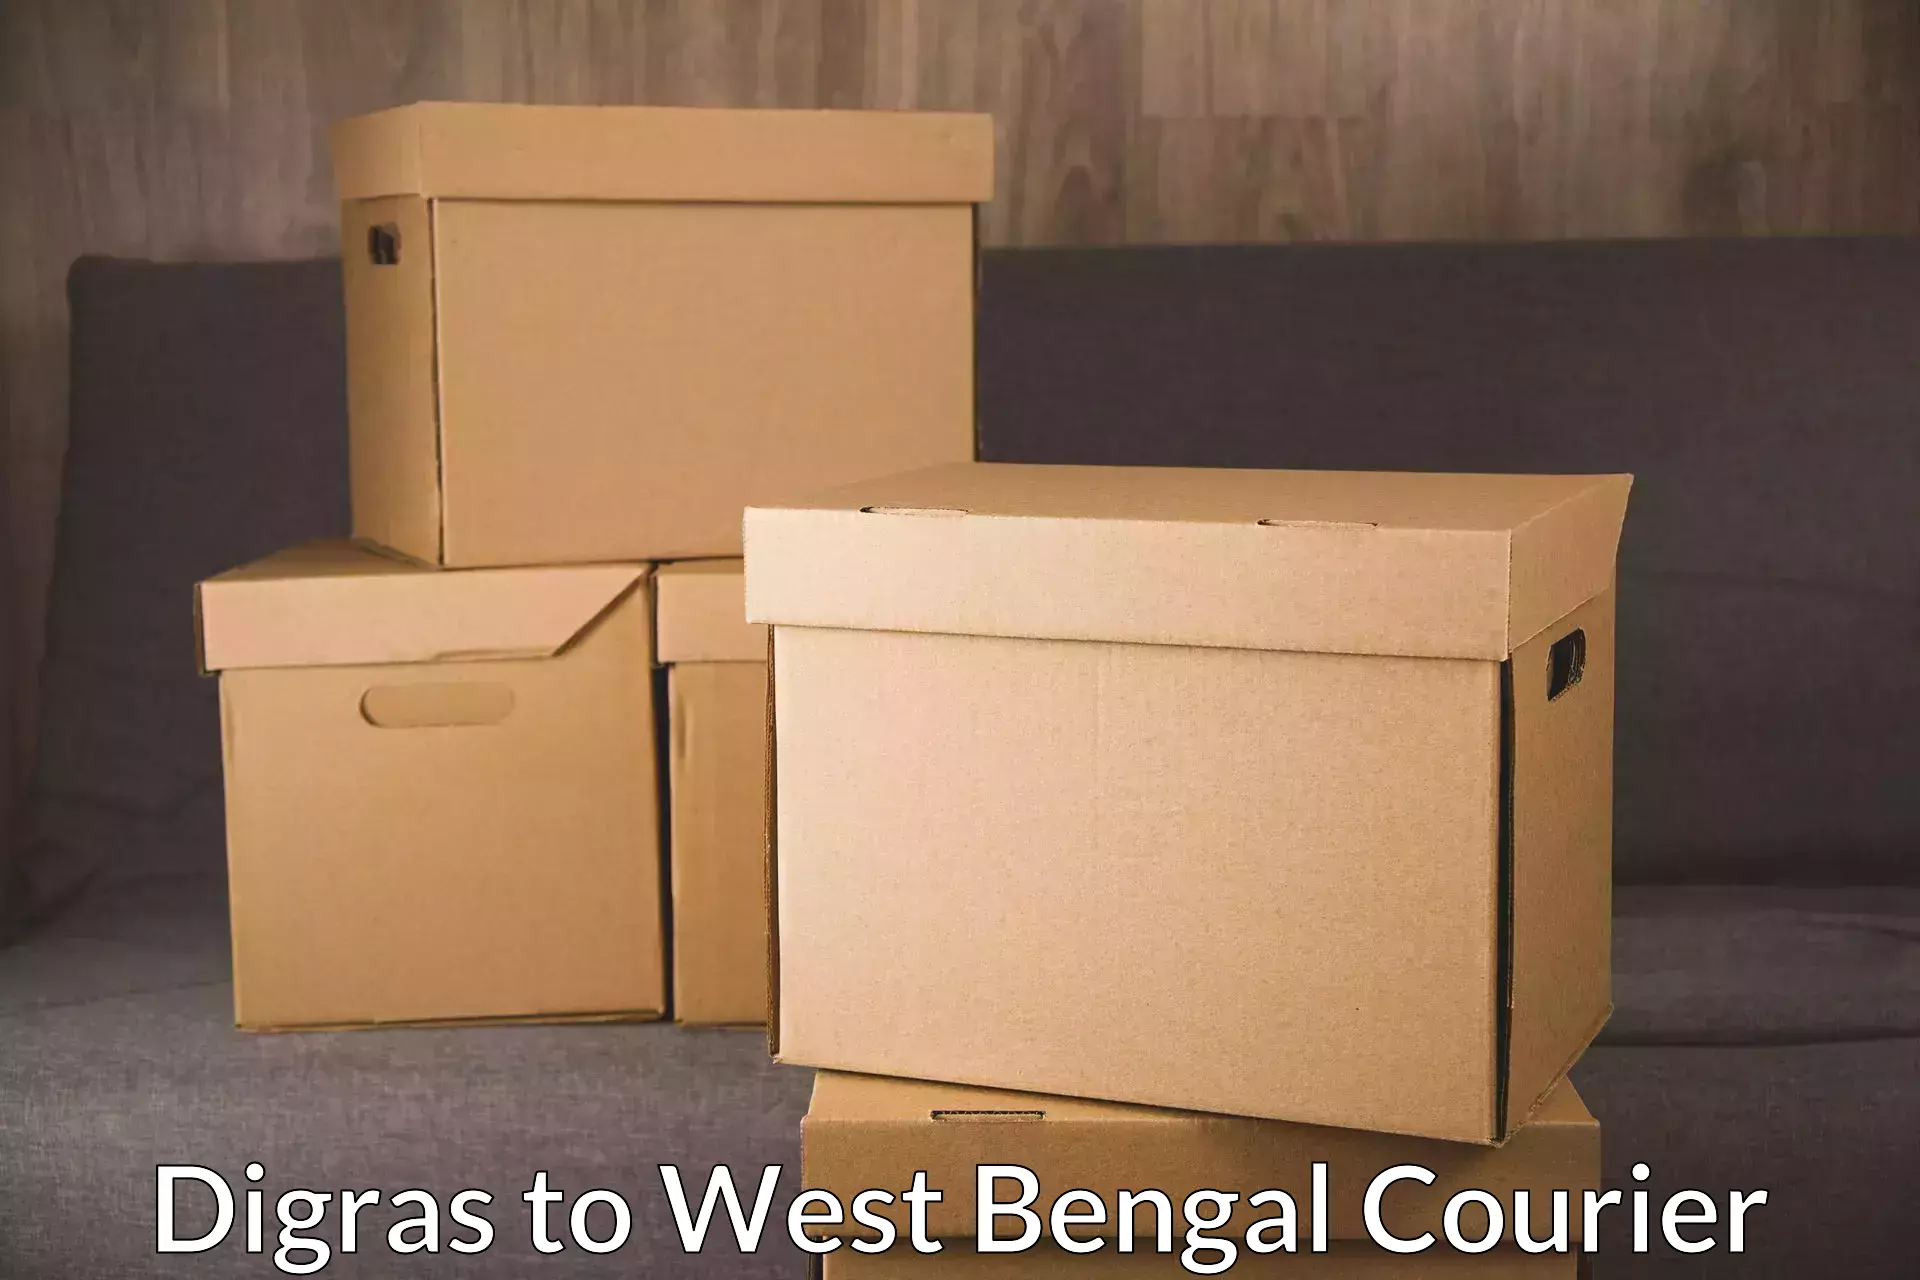 24/7 courier service in Digras to West Bengal